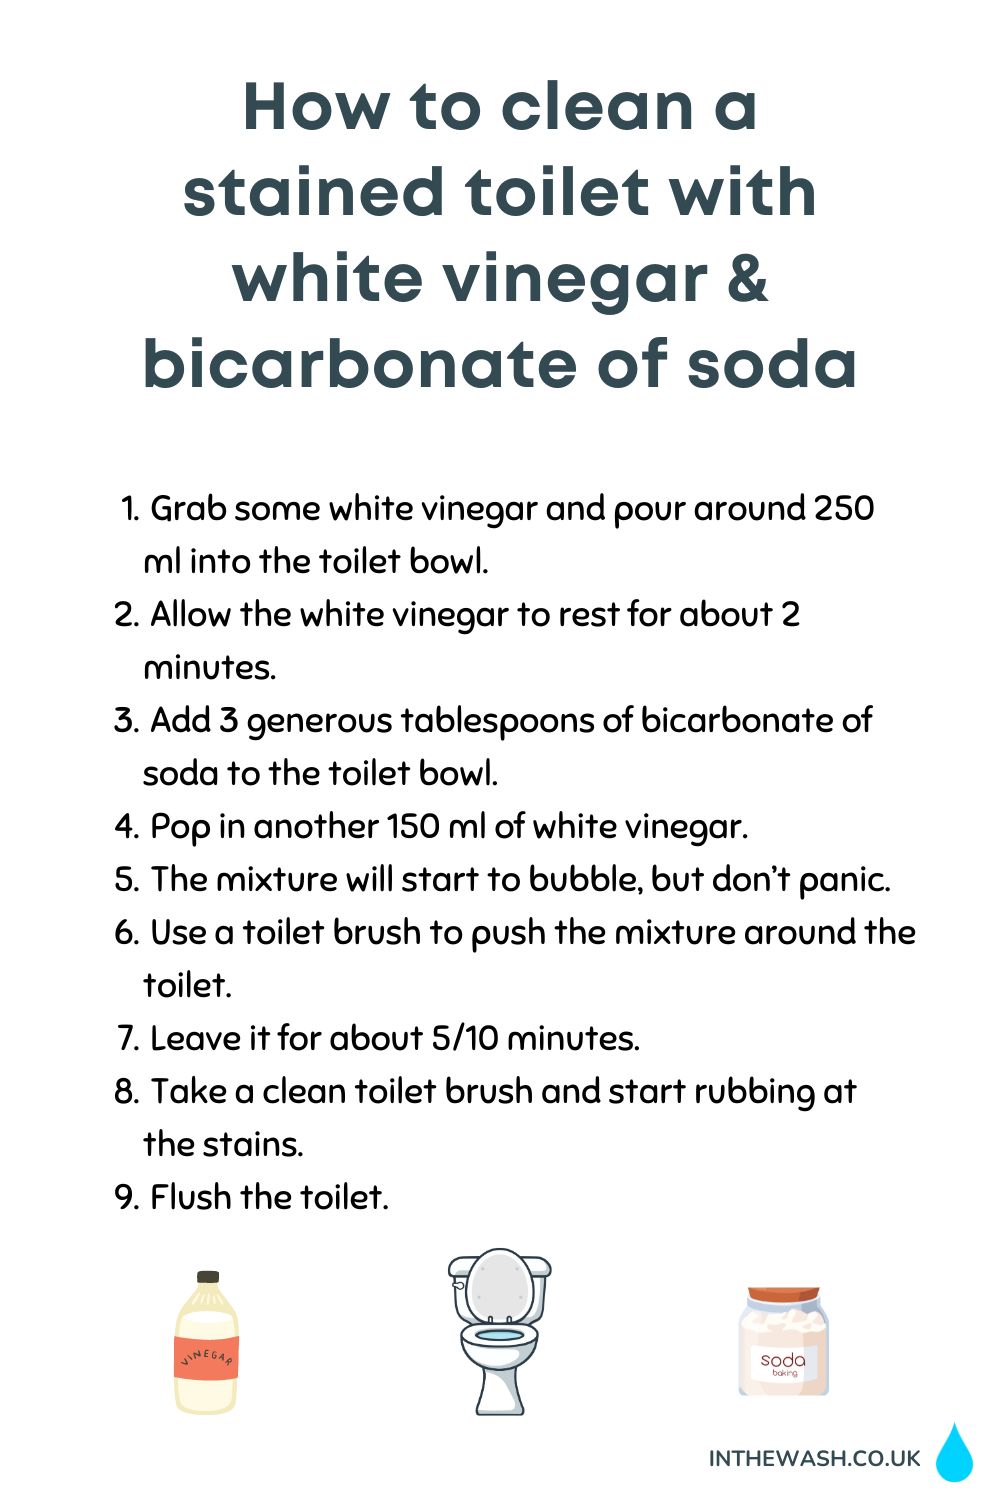 How to clean a stained toilet bowl with white vinegar and bicarbonate of soda